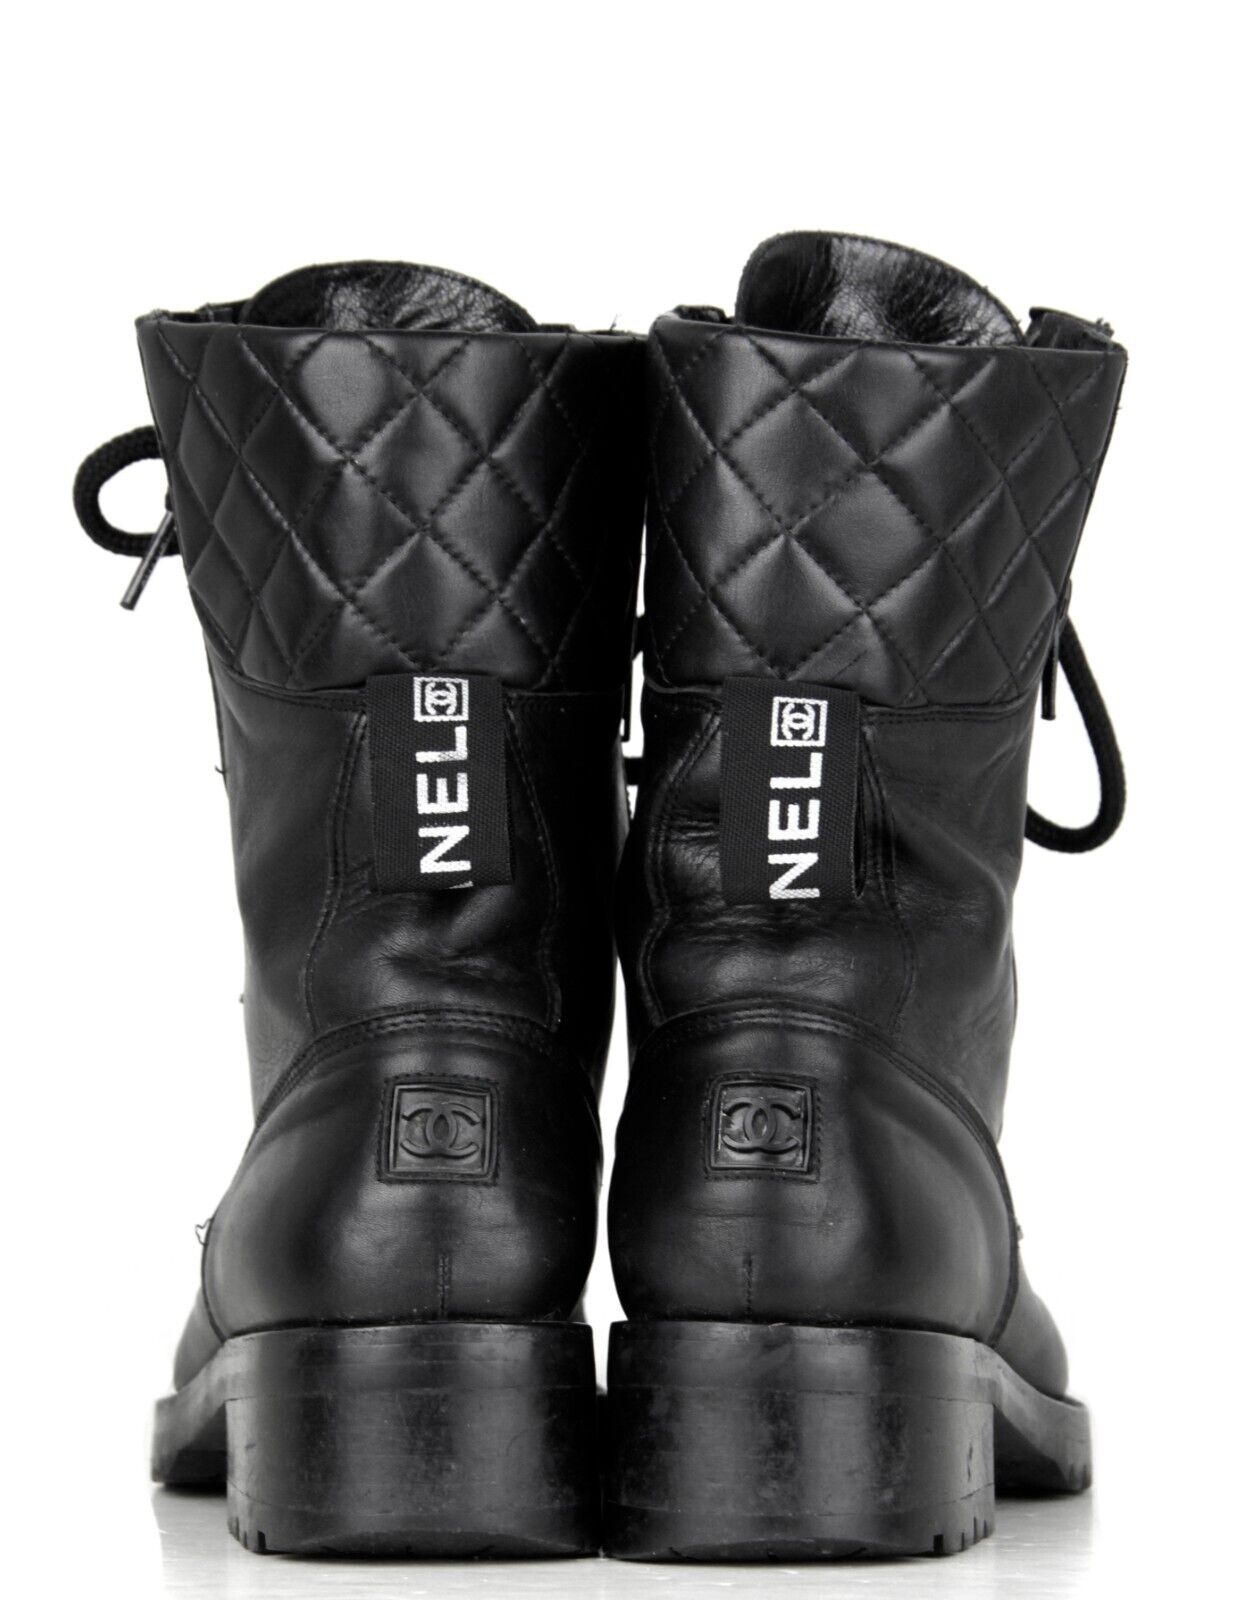 CHANEL, Shoes, Chanel Boots 223 Size 39 Worn 3 Times